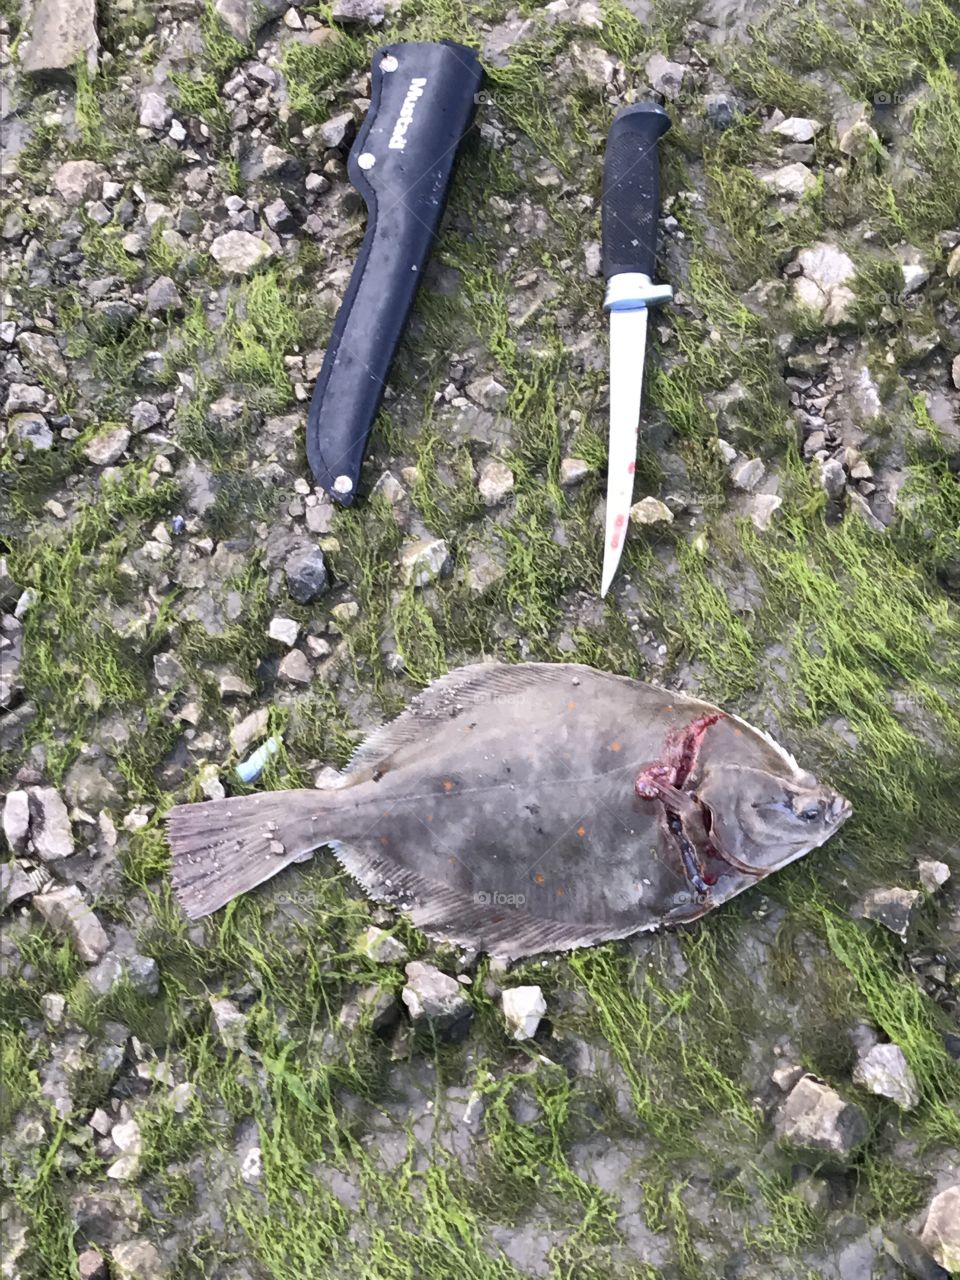 Just been fishing caught this thought I'd take it home started to take its head If and thought I'd get a quick snap chat 